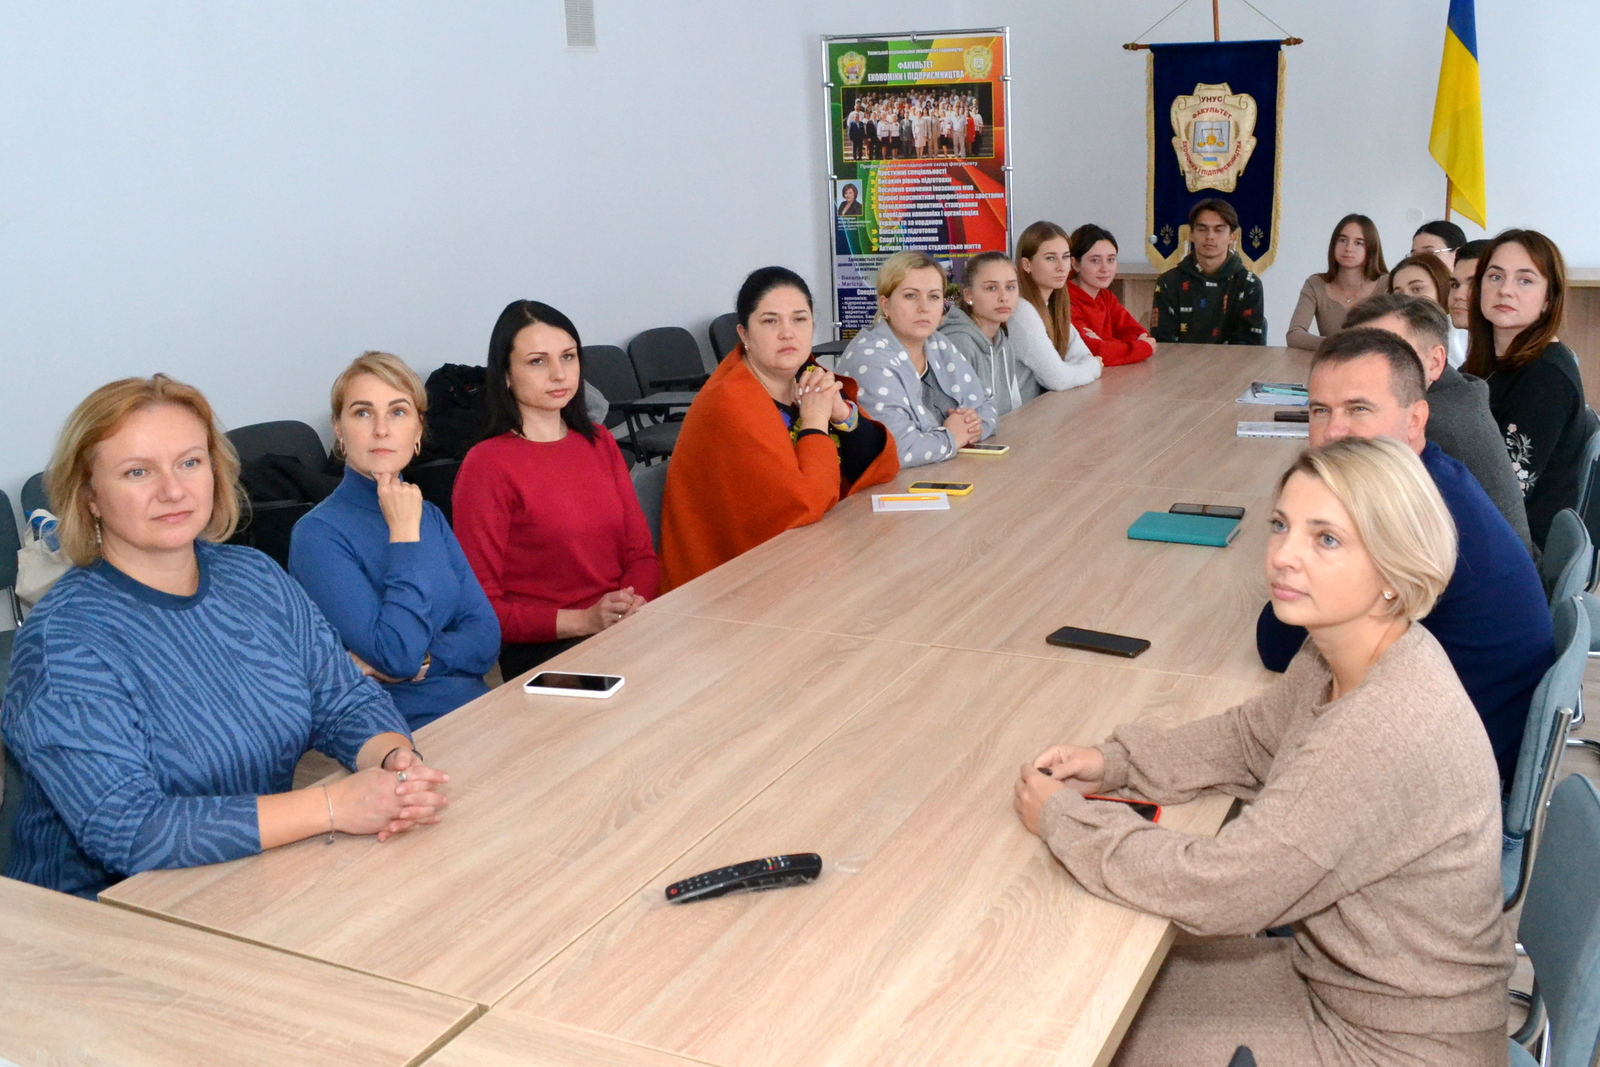 Interdepartmental Seminar “Projects under the EU Erasmus+ Program: New Opportunities and Prospects for Ukrainian Higher Education Institutions”